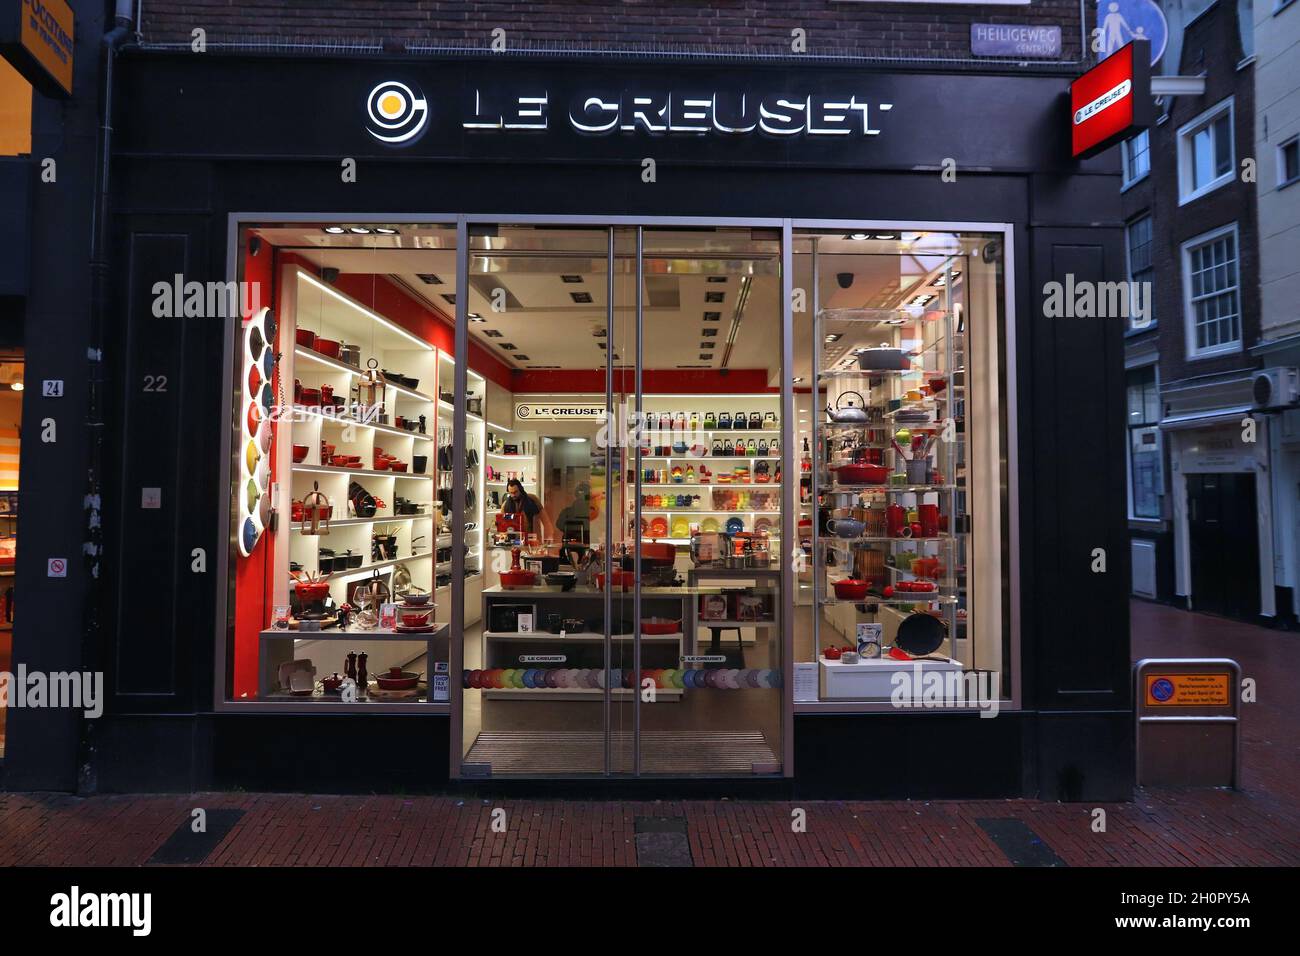 https://c8.alamy.com/comp/2H0PY5A/amsterdam-netherlands-december-6-2018-le-creuset-cookware-shop-in-amsterdam-netherlands-le-creuset-is-a-french-cookware-company-specializing-in-2H0PY5A.jpg